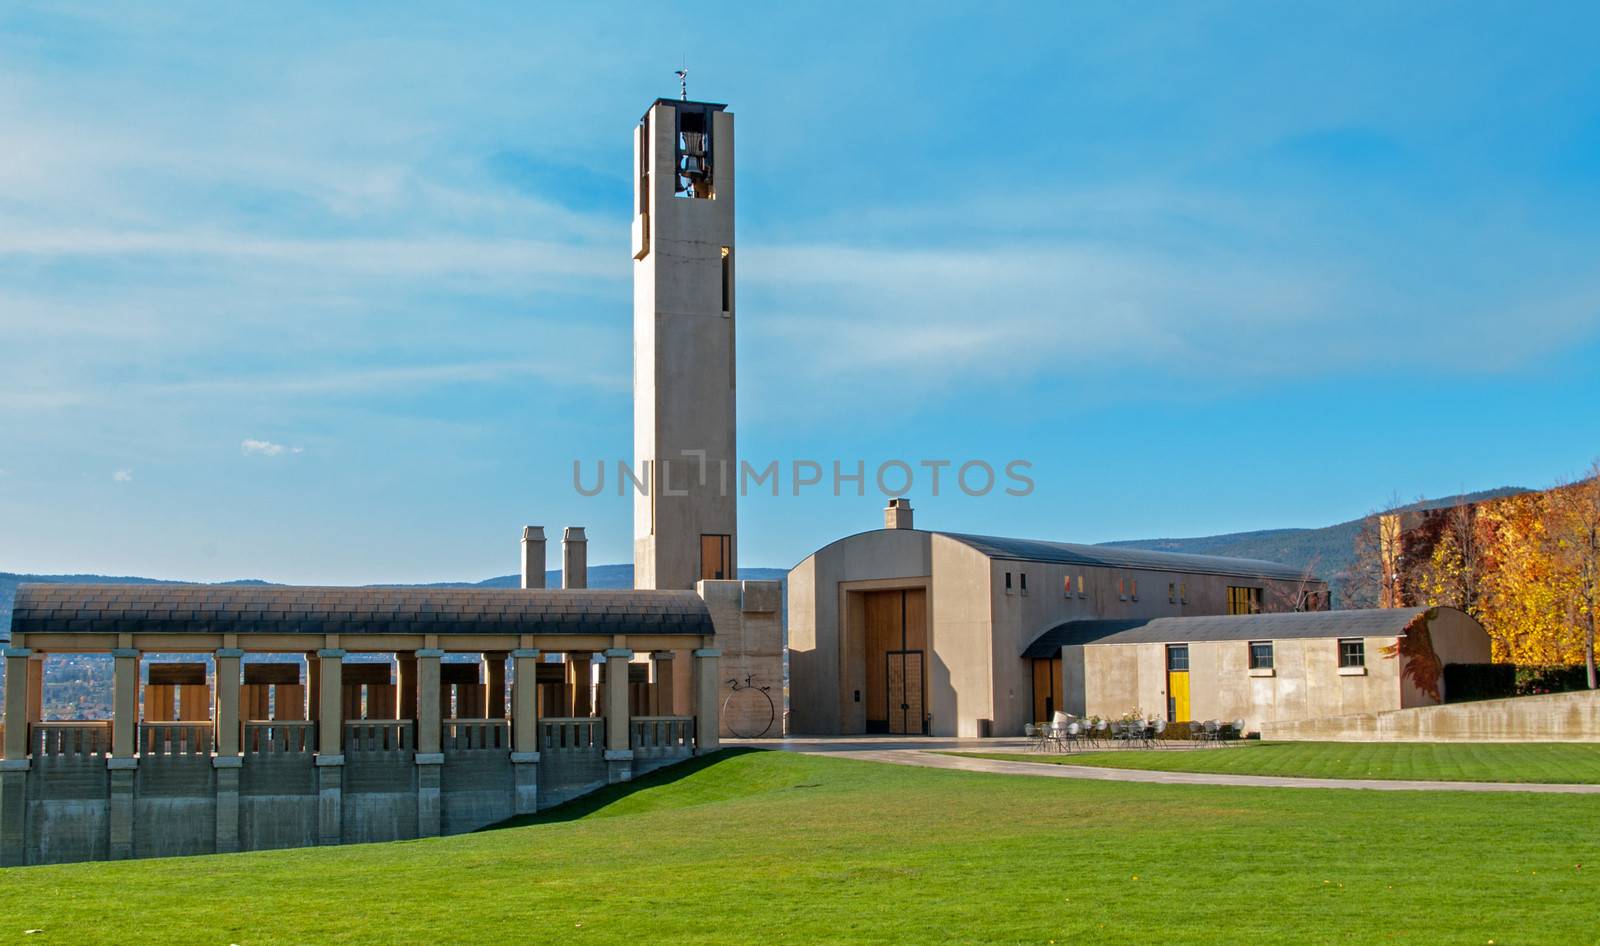 Mission Hill Winery buildings